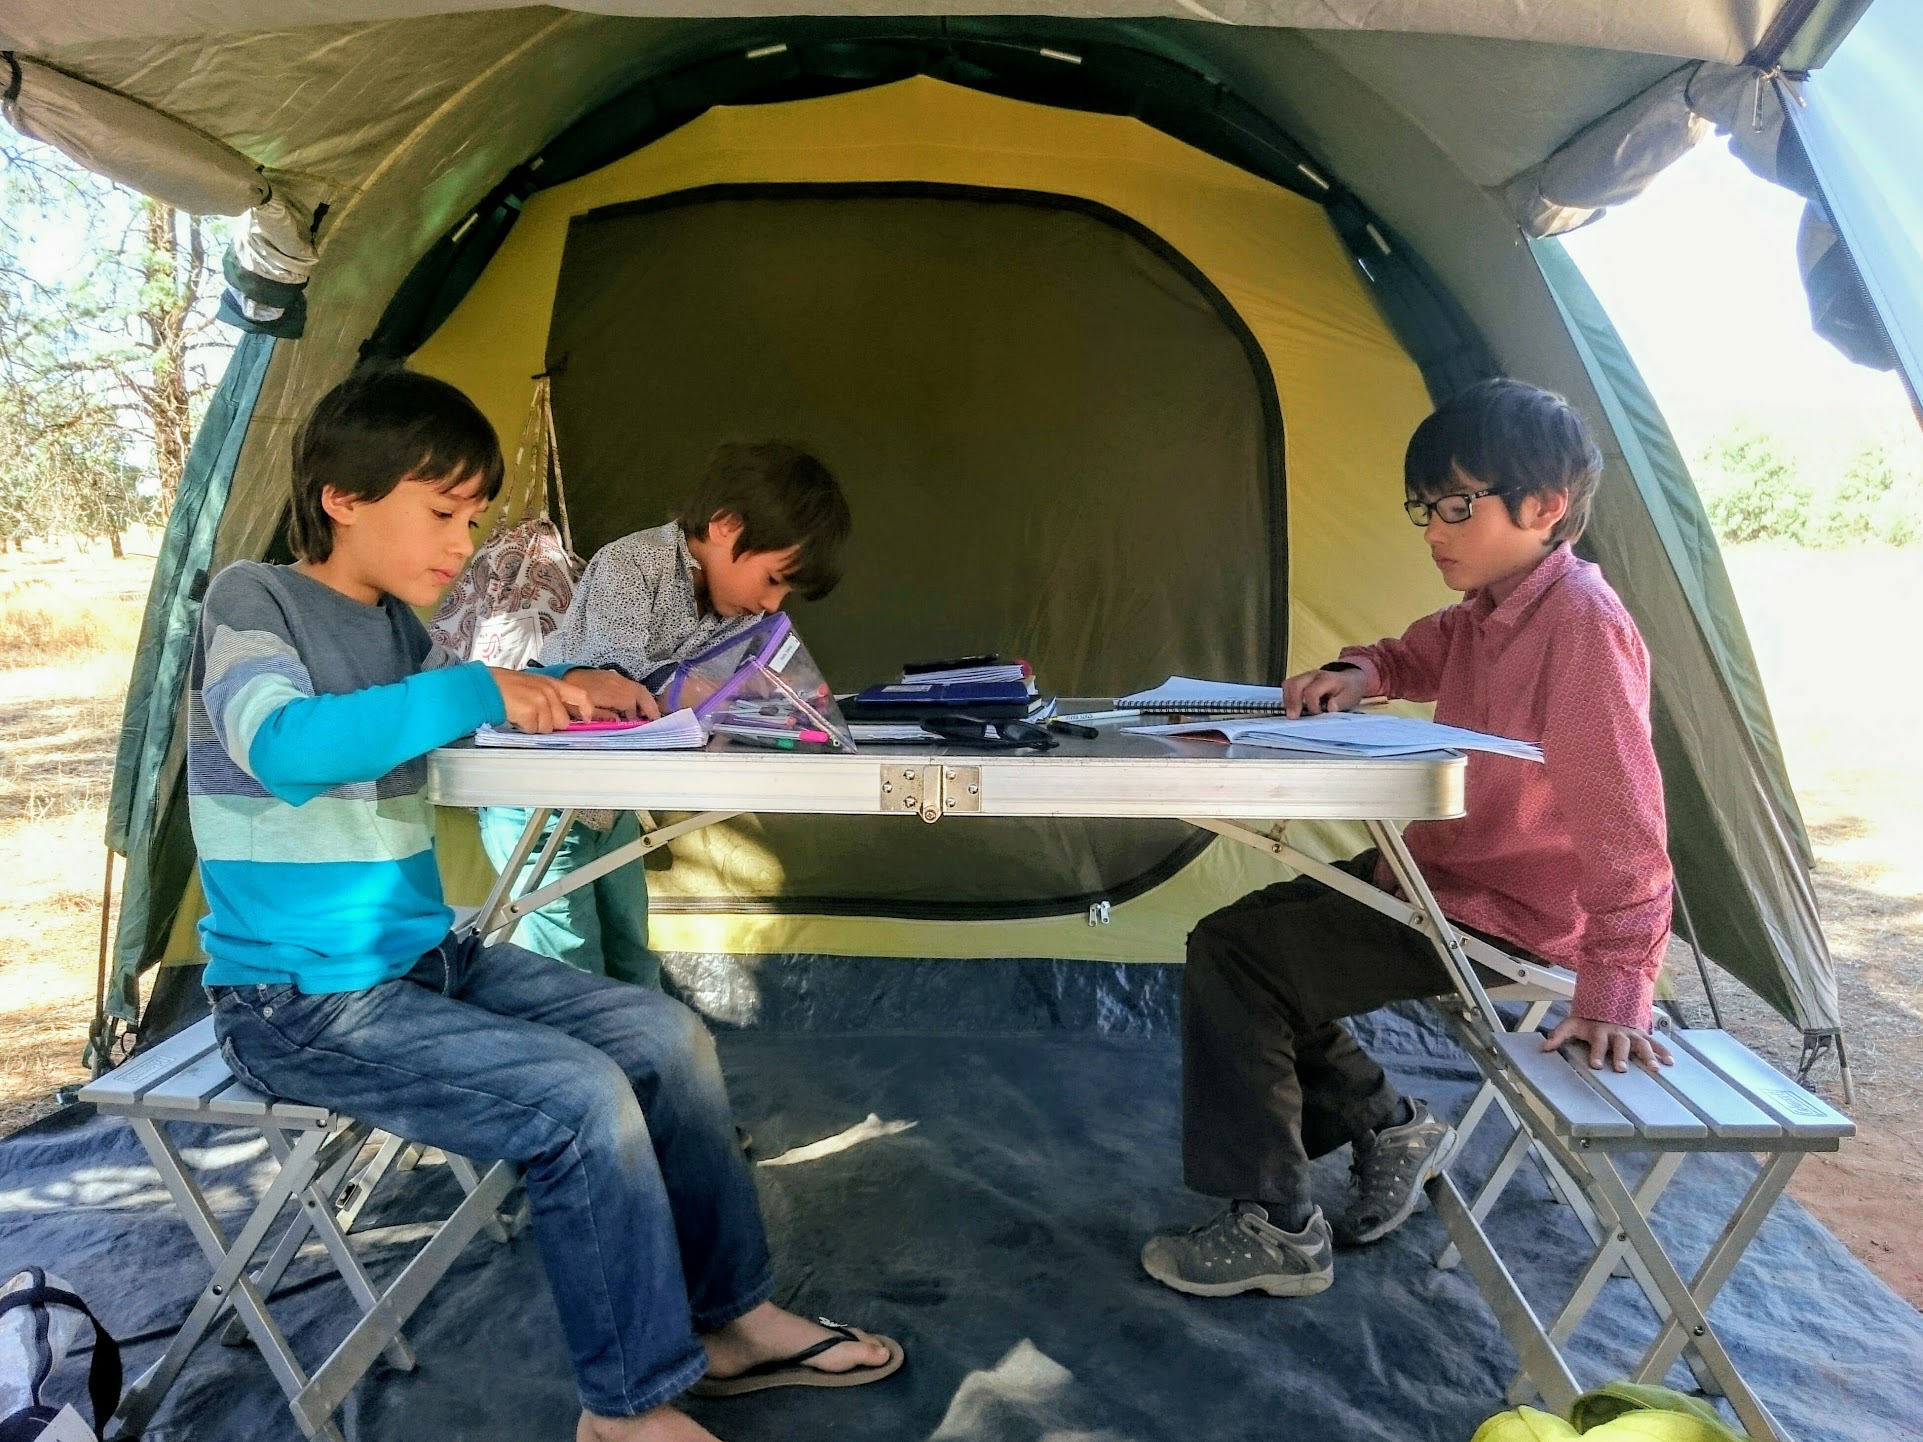 Tent schooling in the Outback.